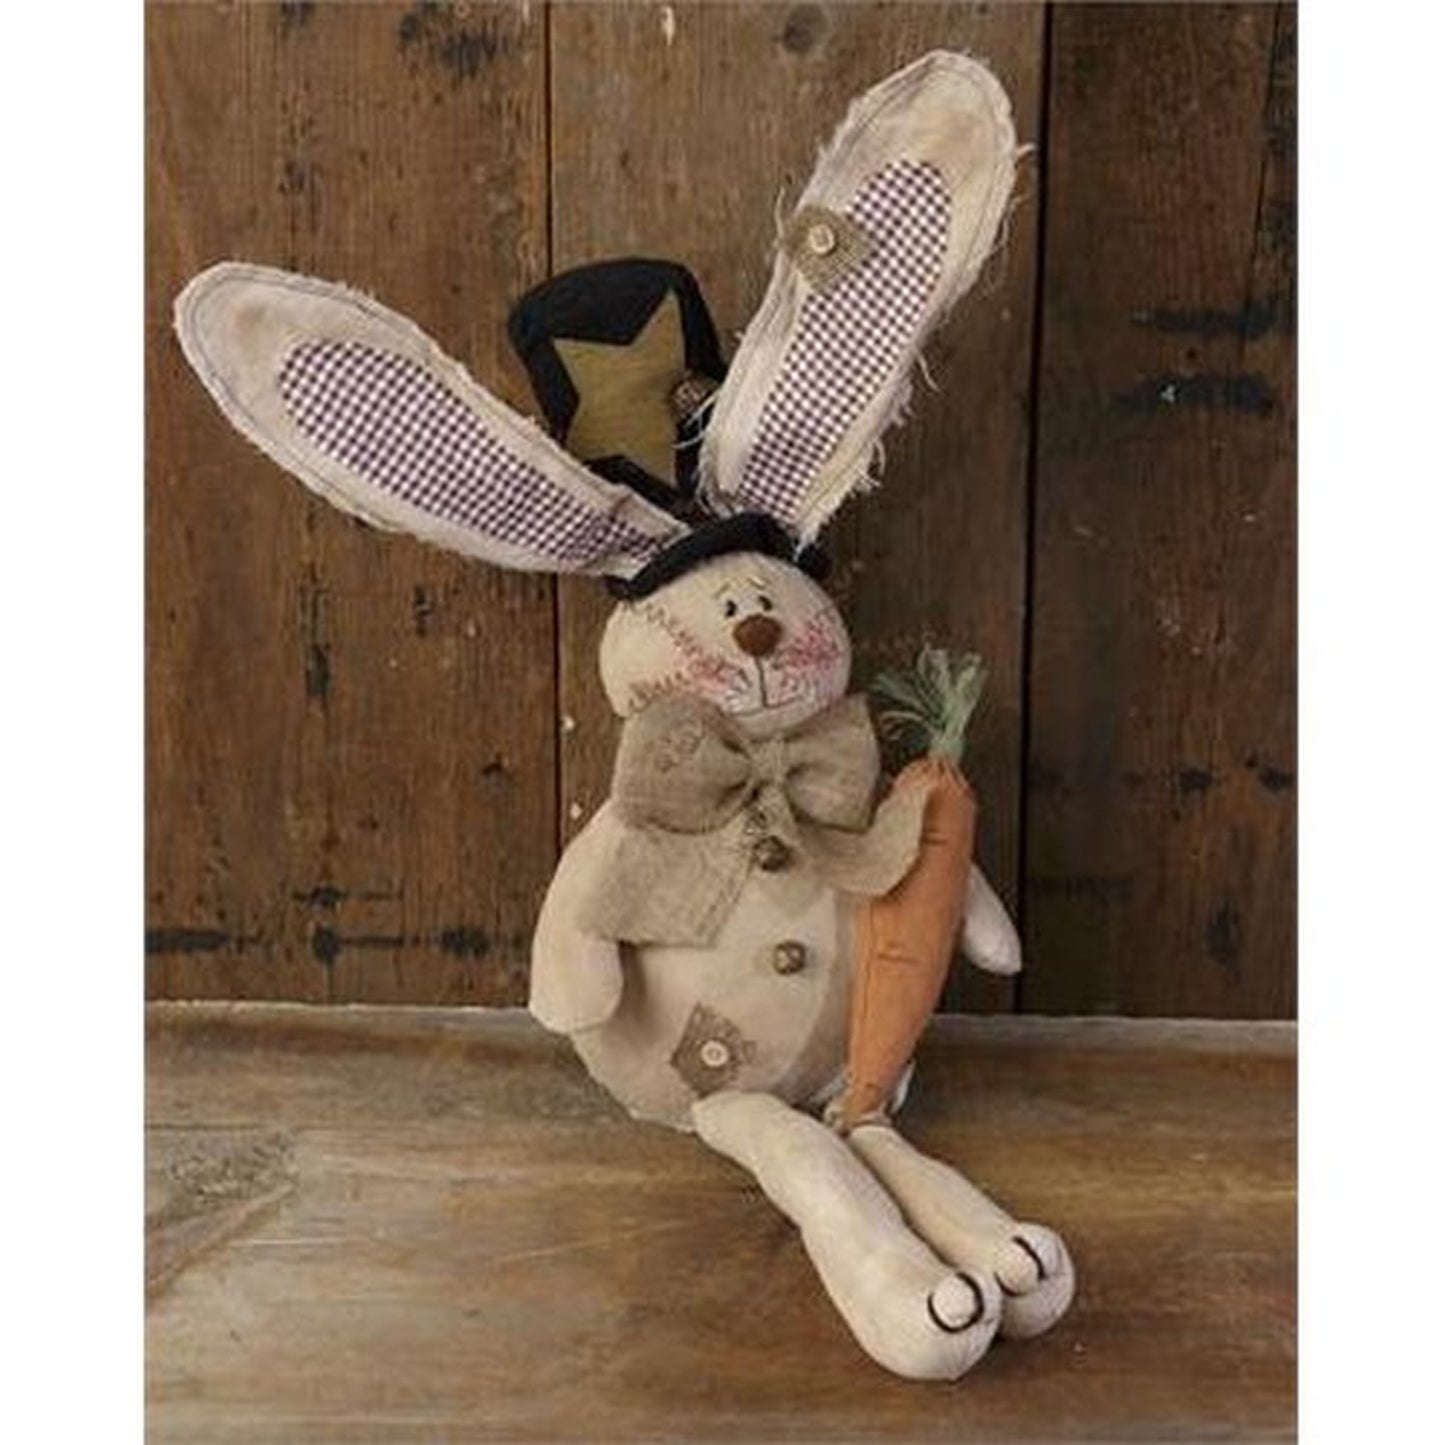 Your Heart's Delight Buttons Burlap & Bows - Sitting Bunny with Carrot, Fabric